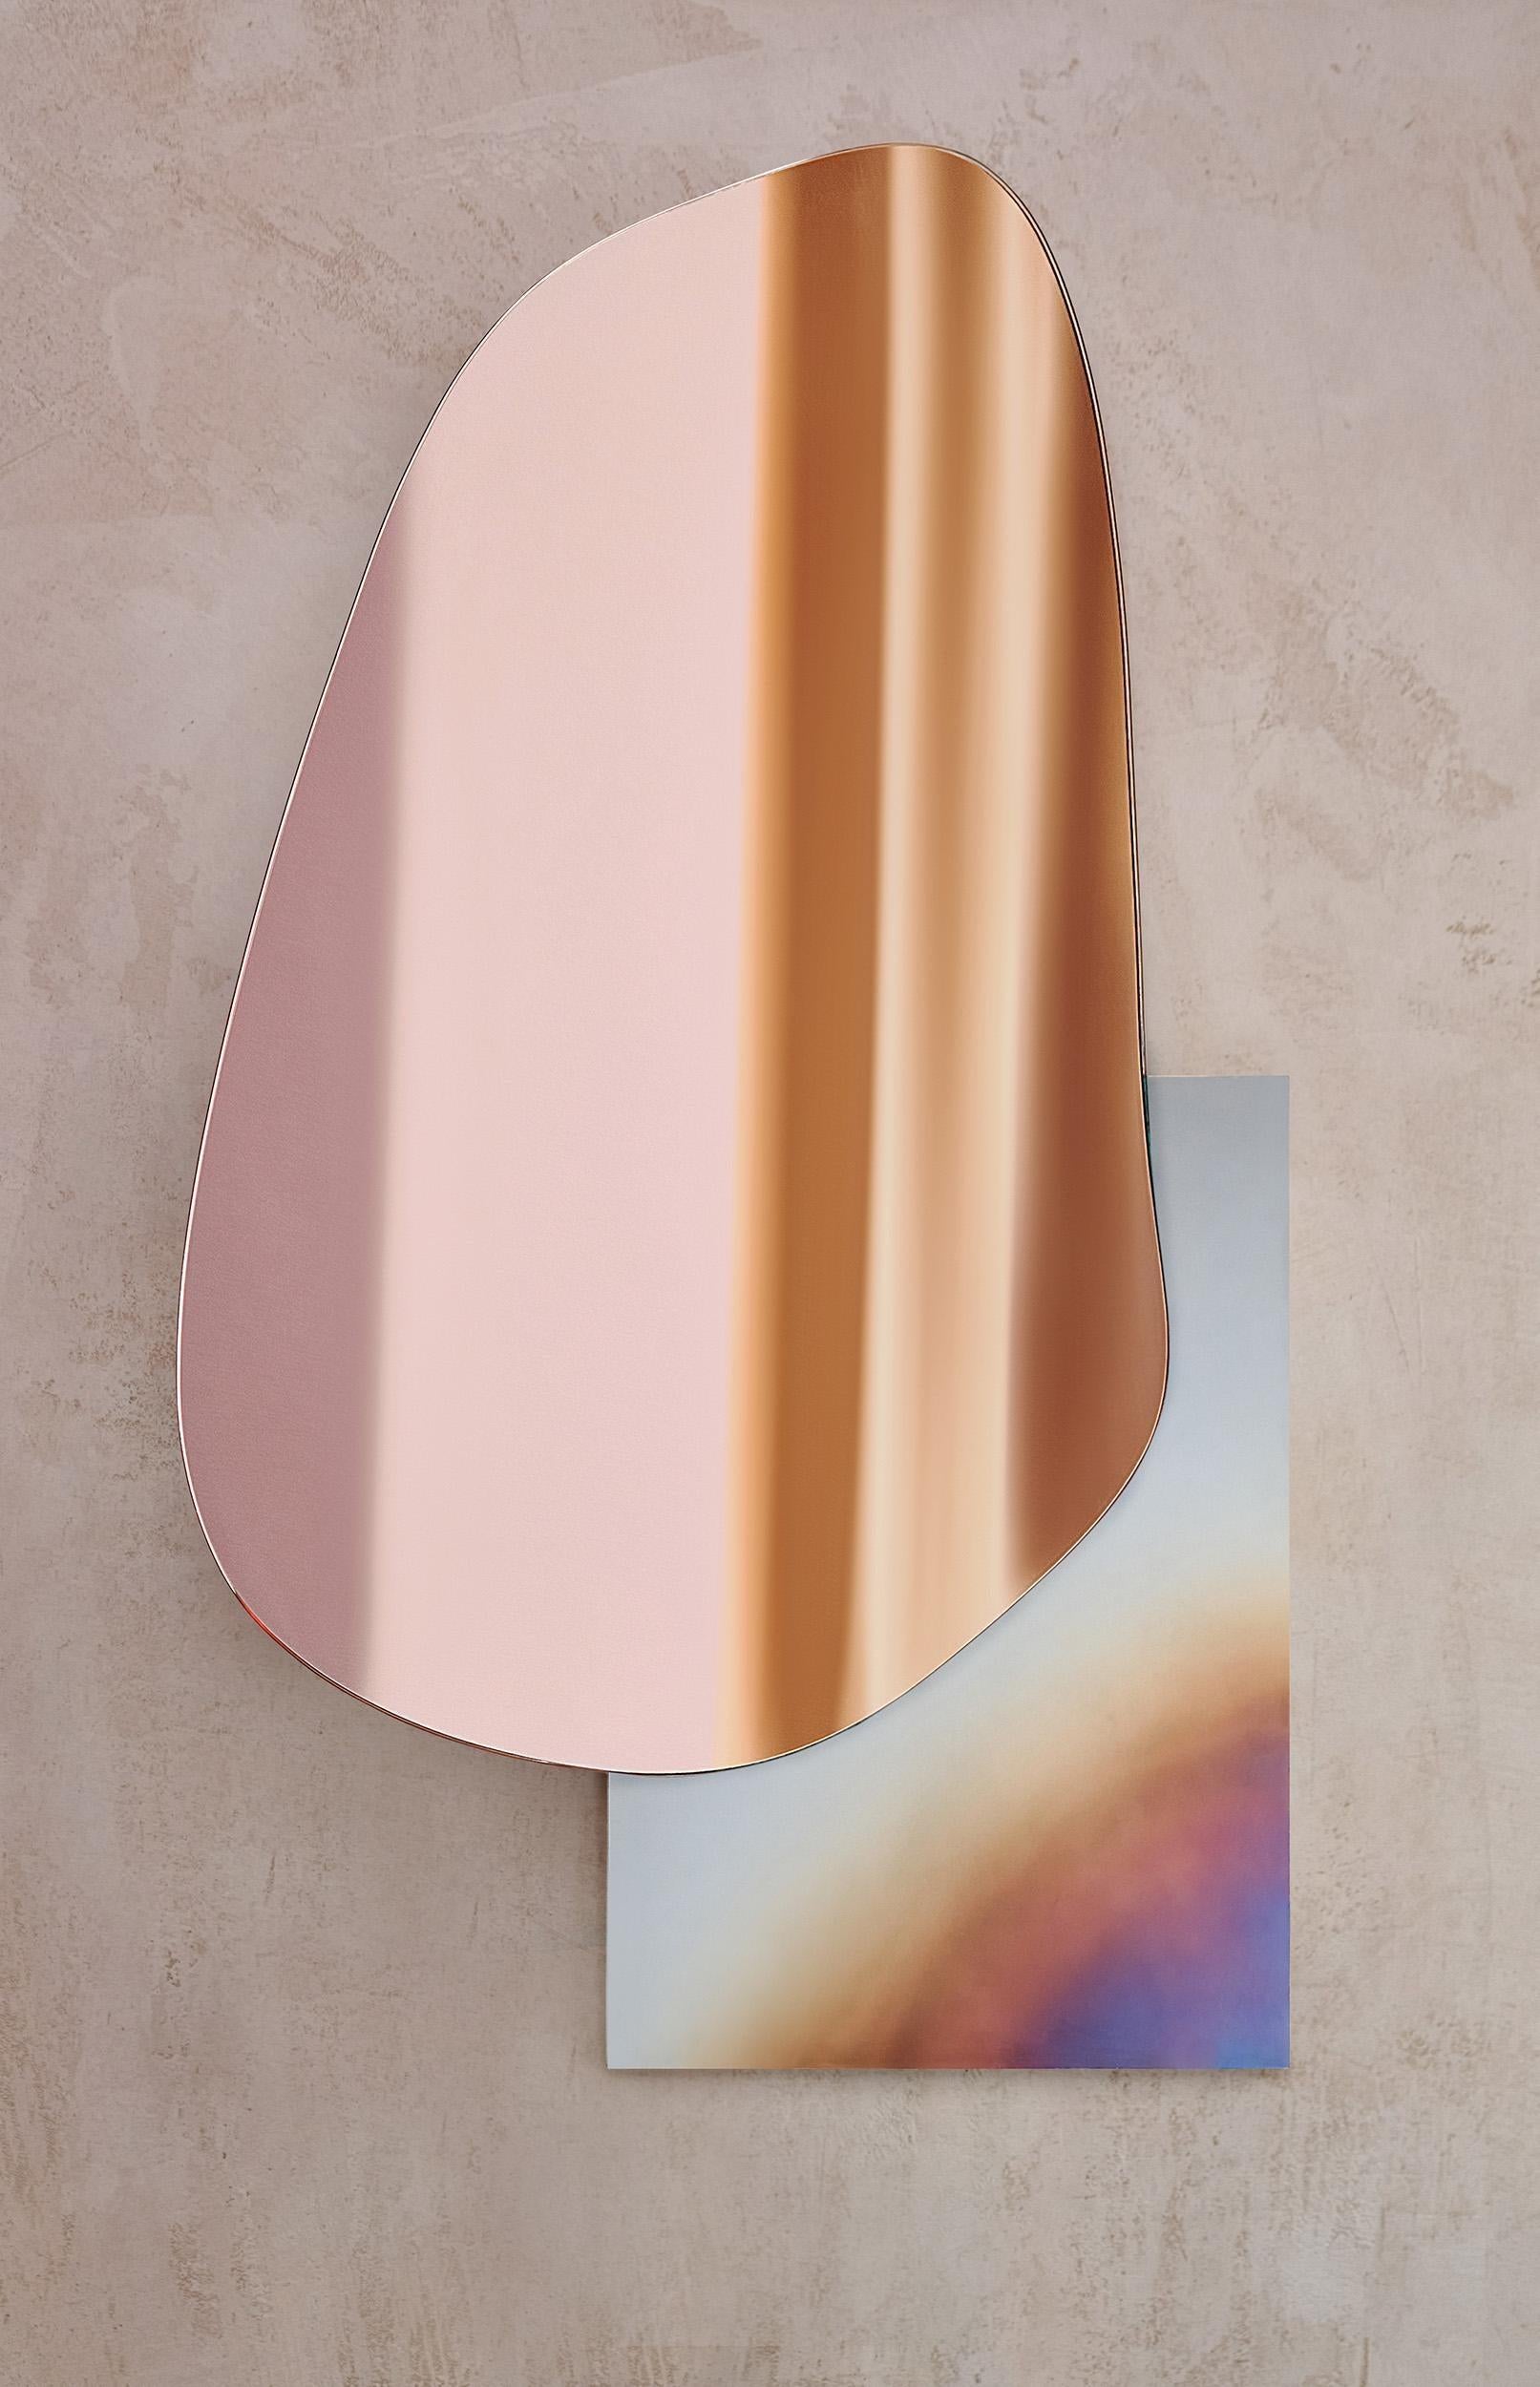 Organic Modern Contemporary Wall Mirror 'Lake 3' by Noom, White Marble and Copper Tint For Sale